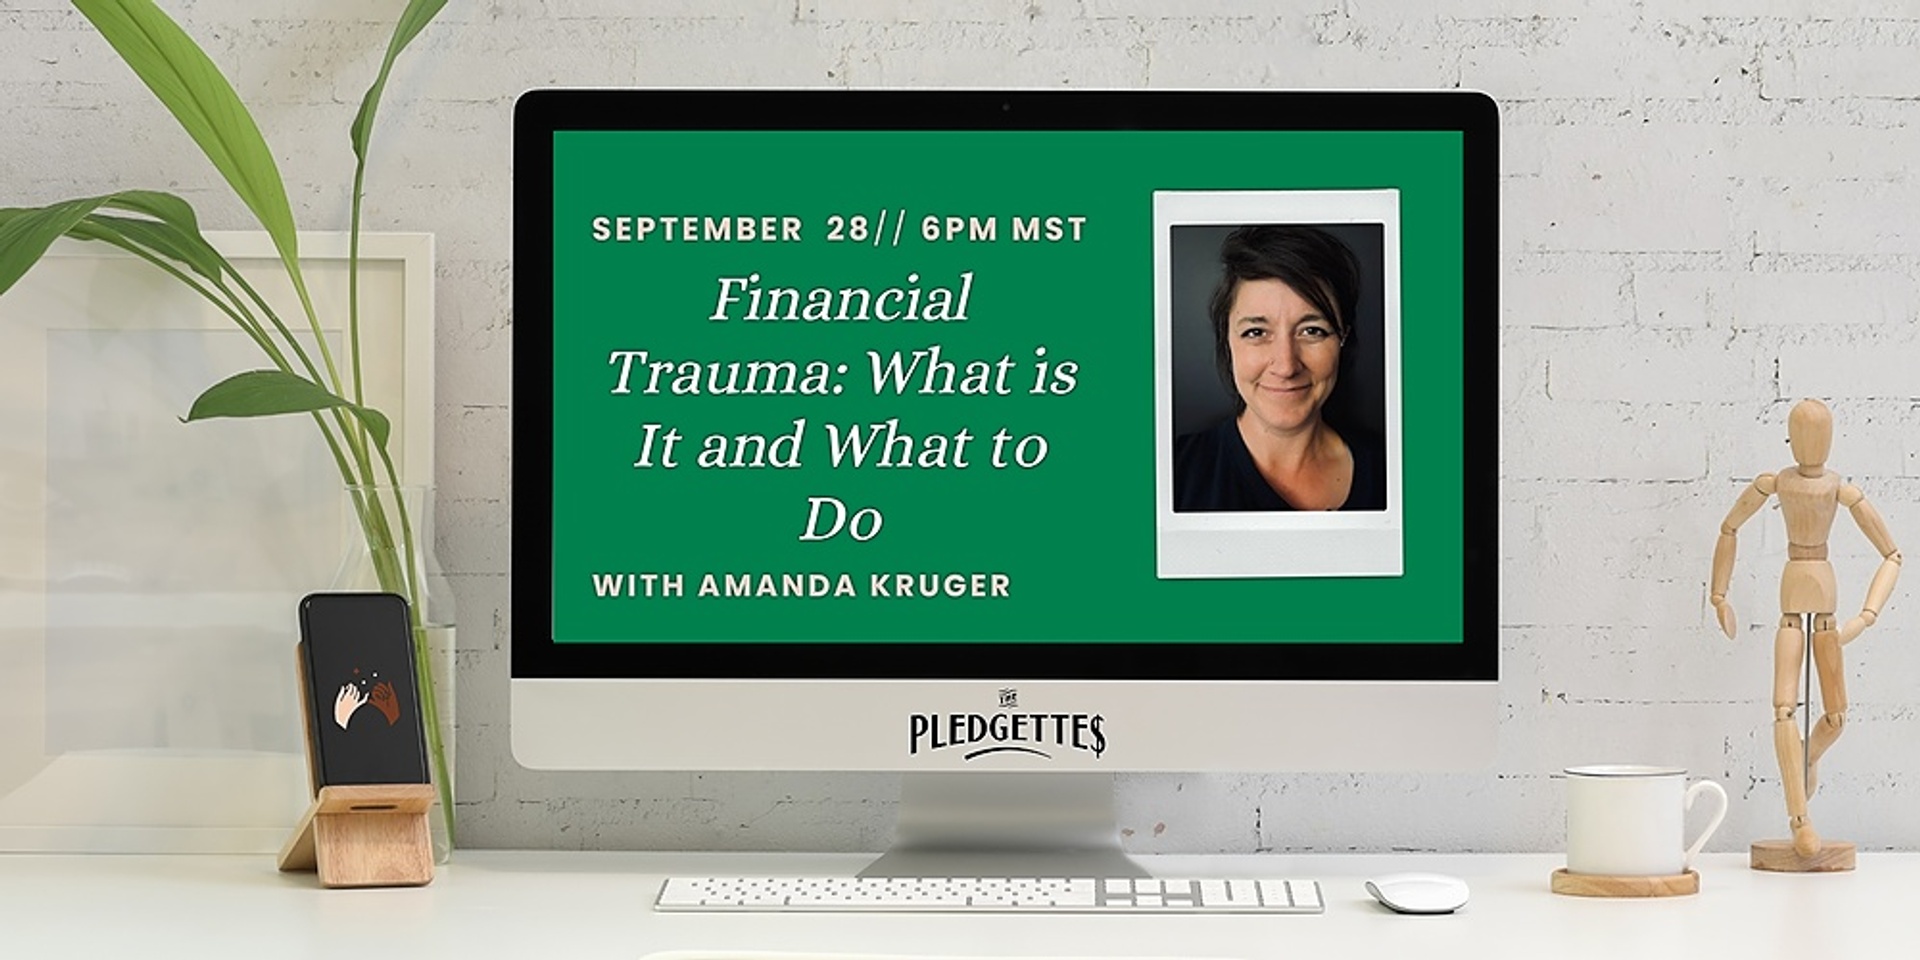 Financial Trauma: What is It and What to Do with Amanda Kruger